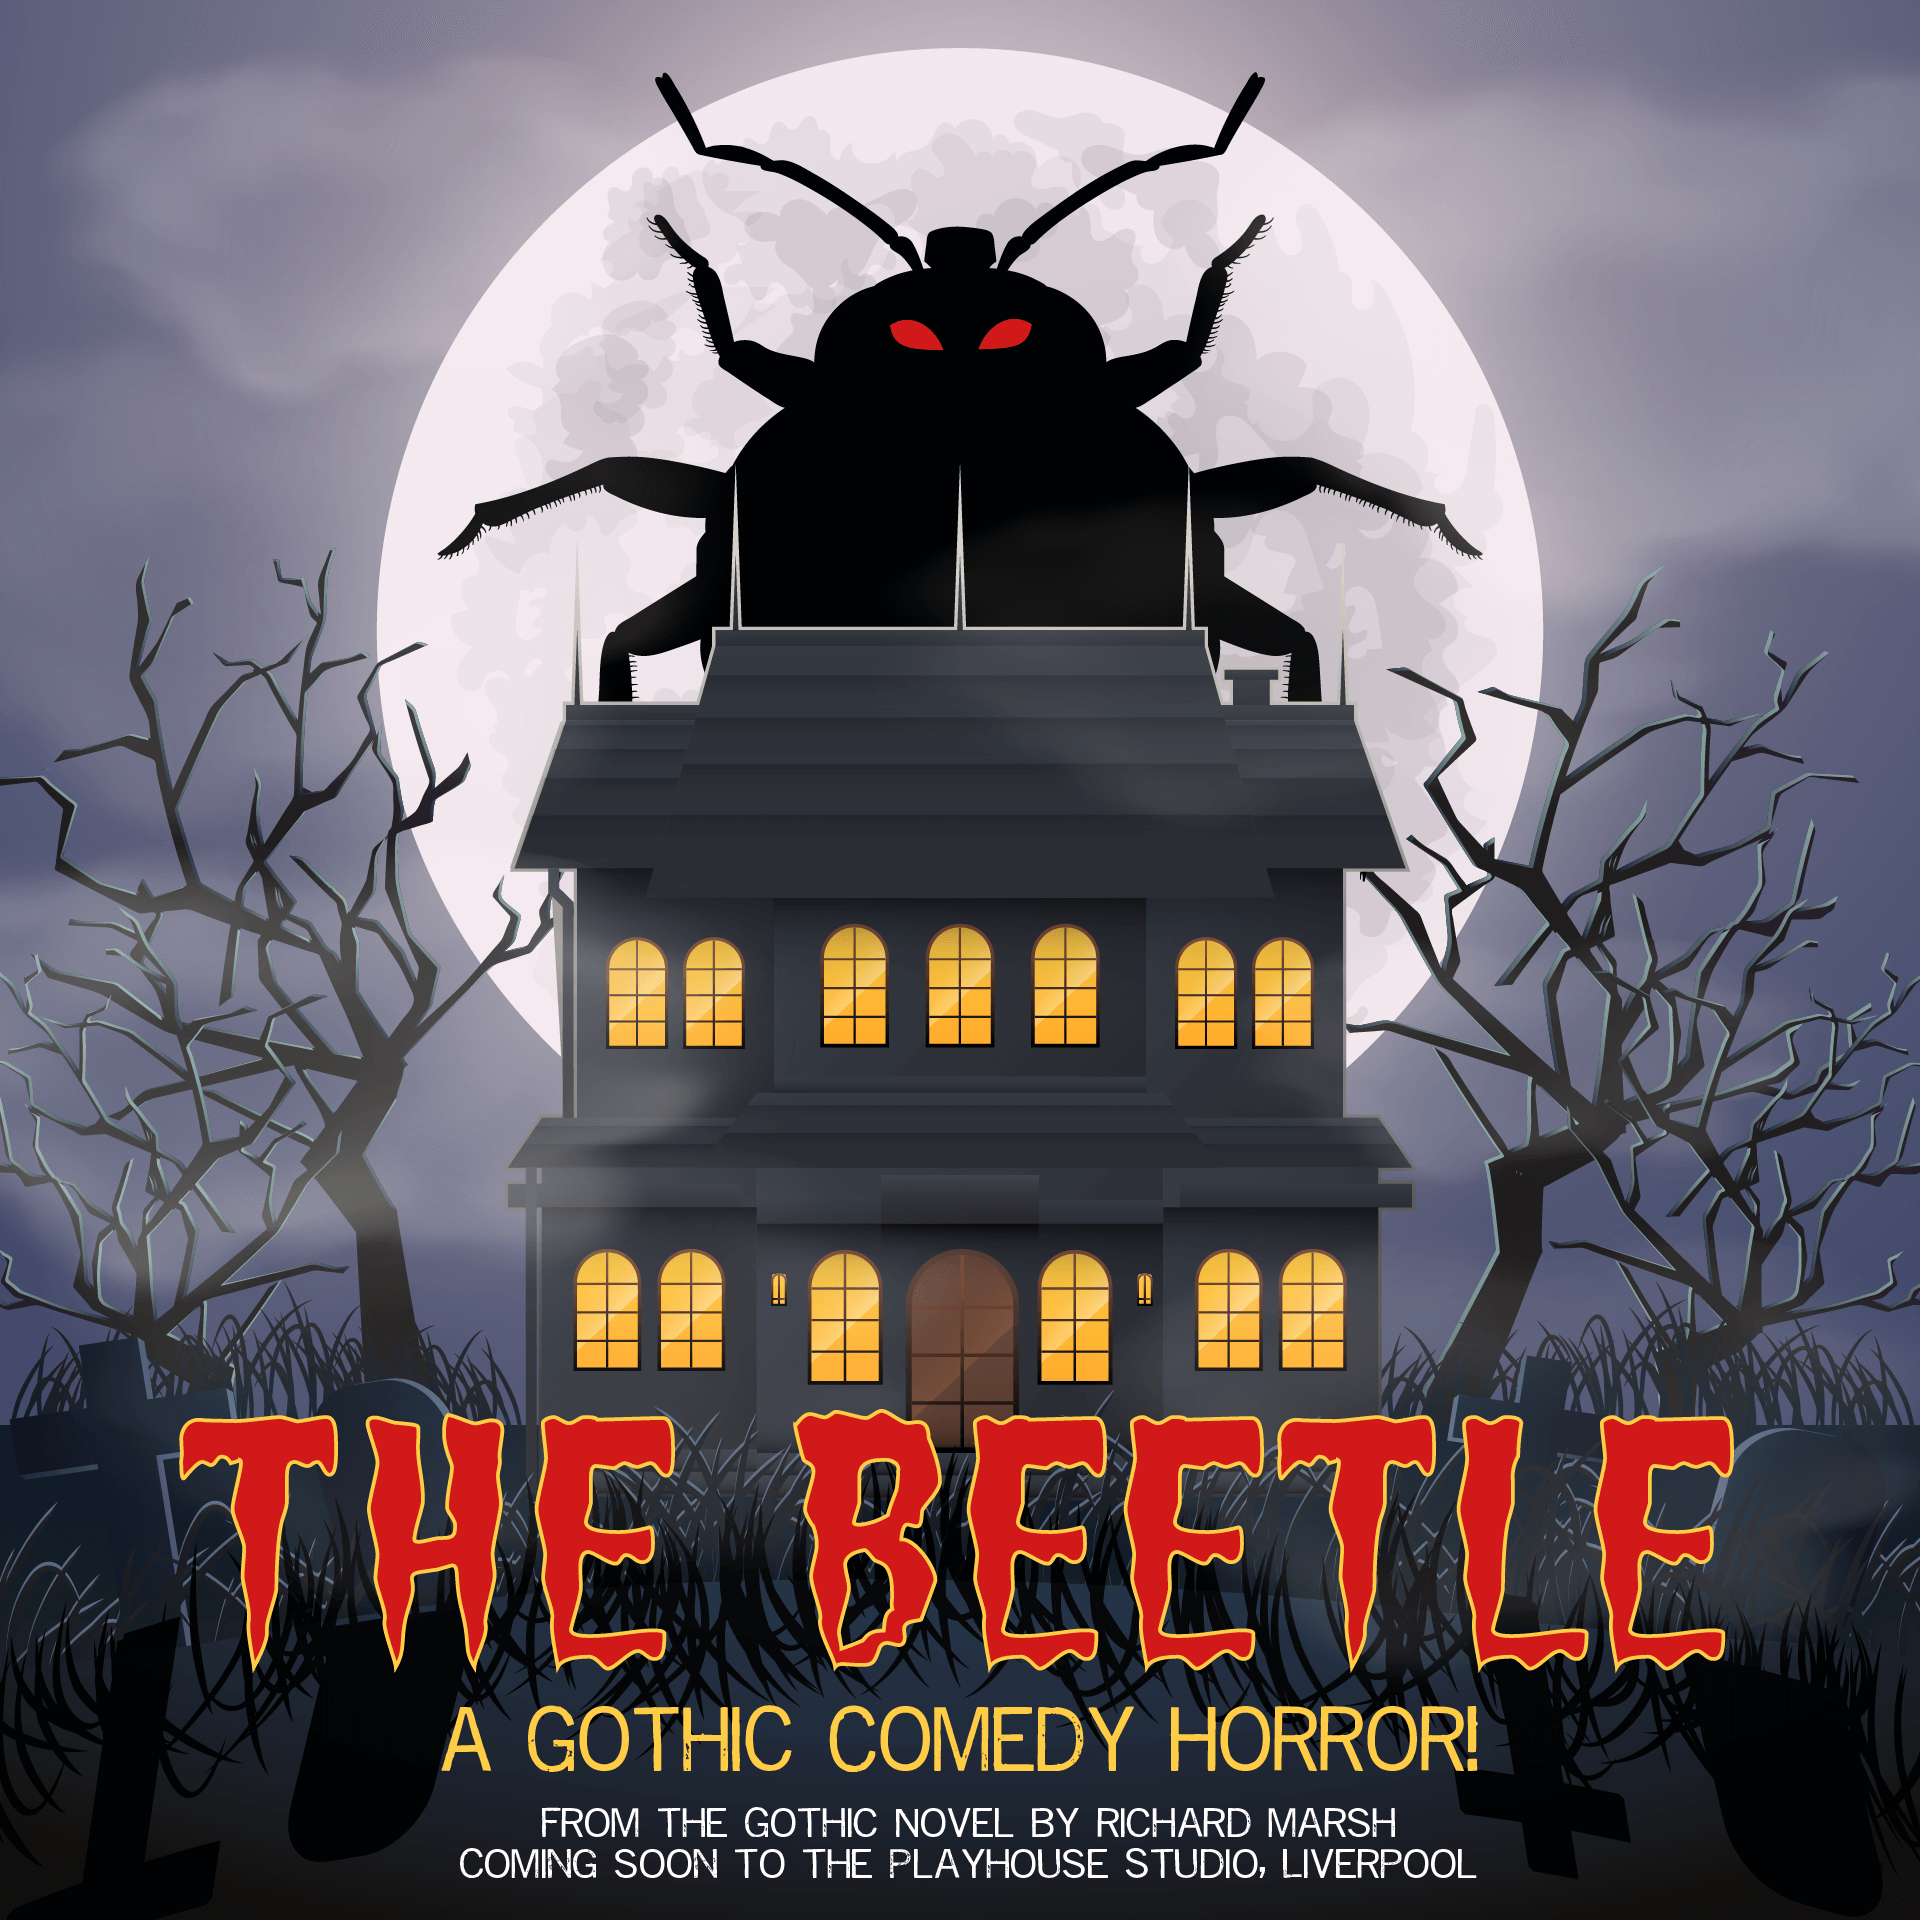 The Beetle: A malevolent mystical Beetle looming over a Gothic manor before a full moon.